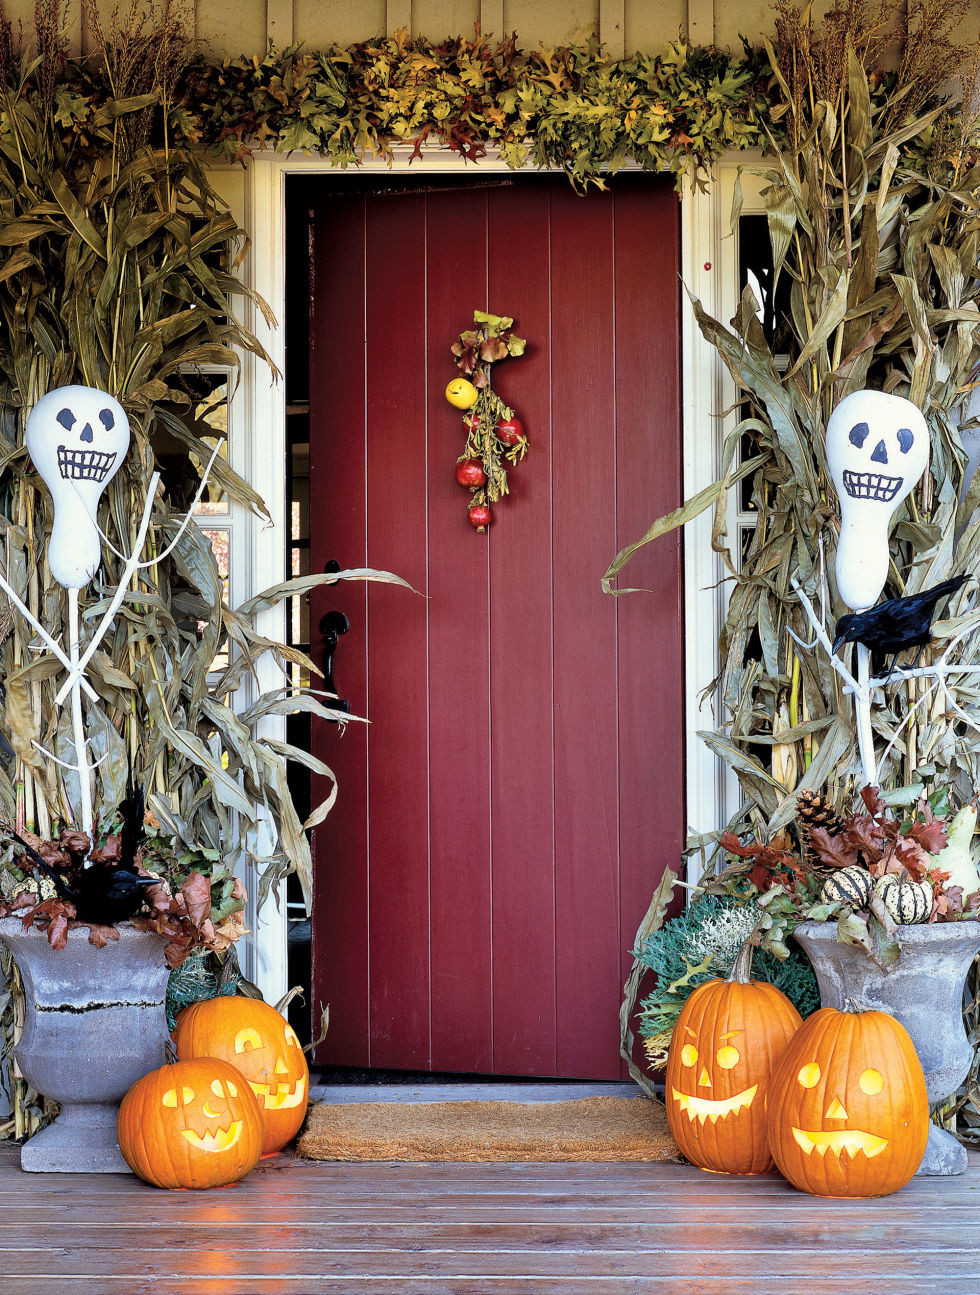 Halloween Decorations Outdoor
 50 Awesome Halloween Decorations to Make This Year – The